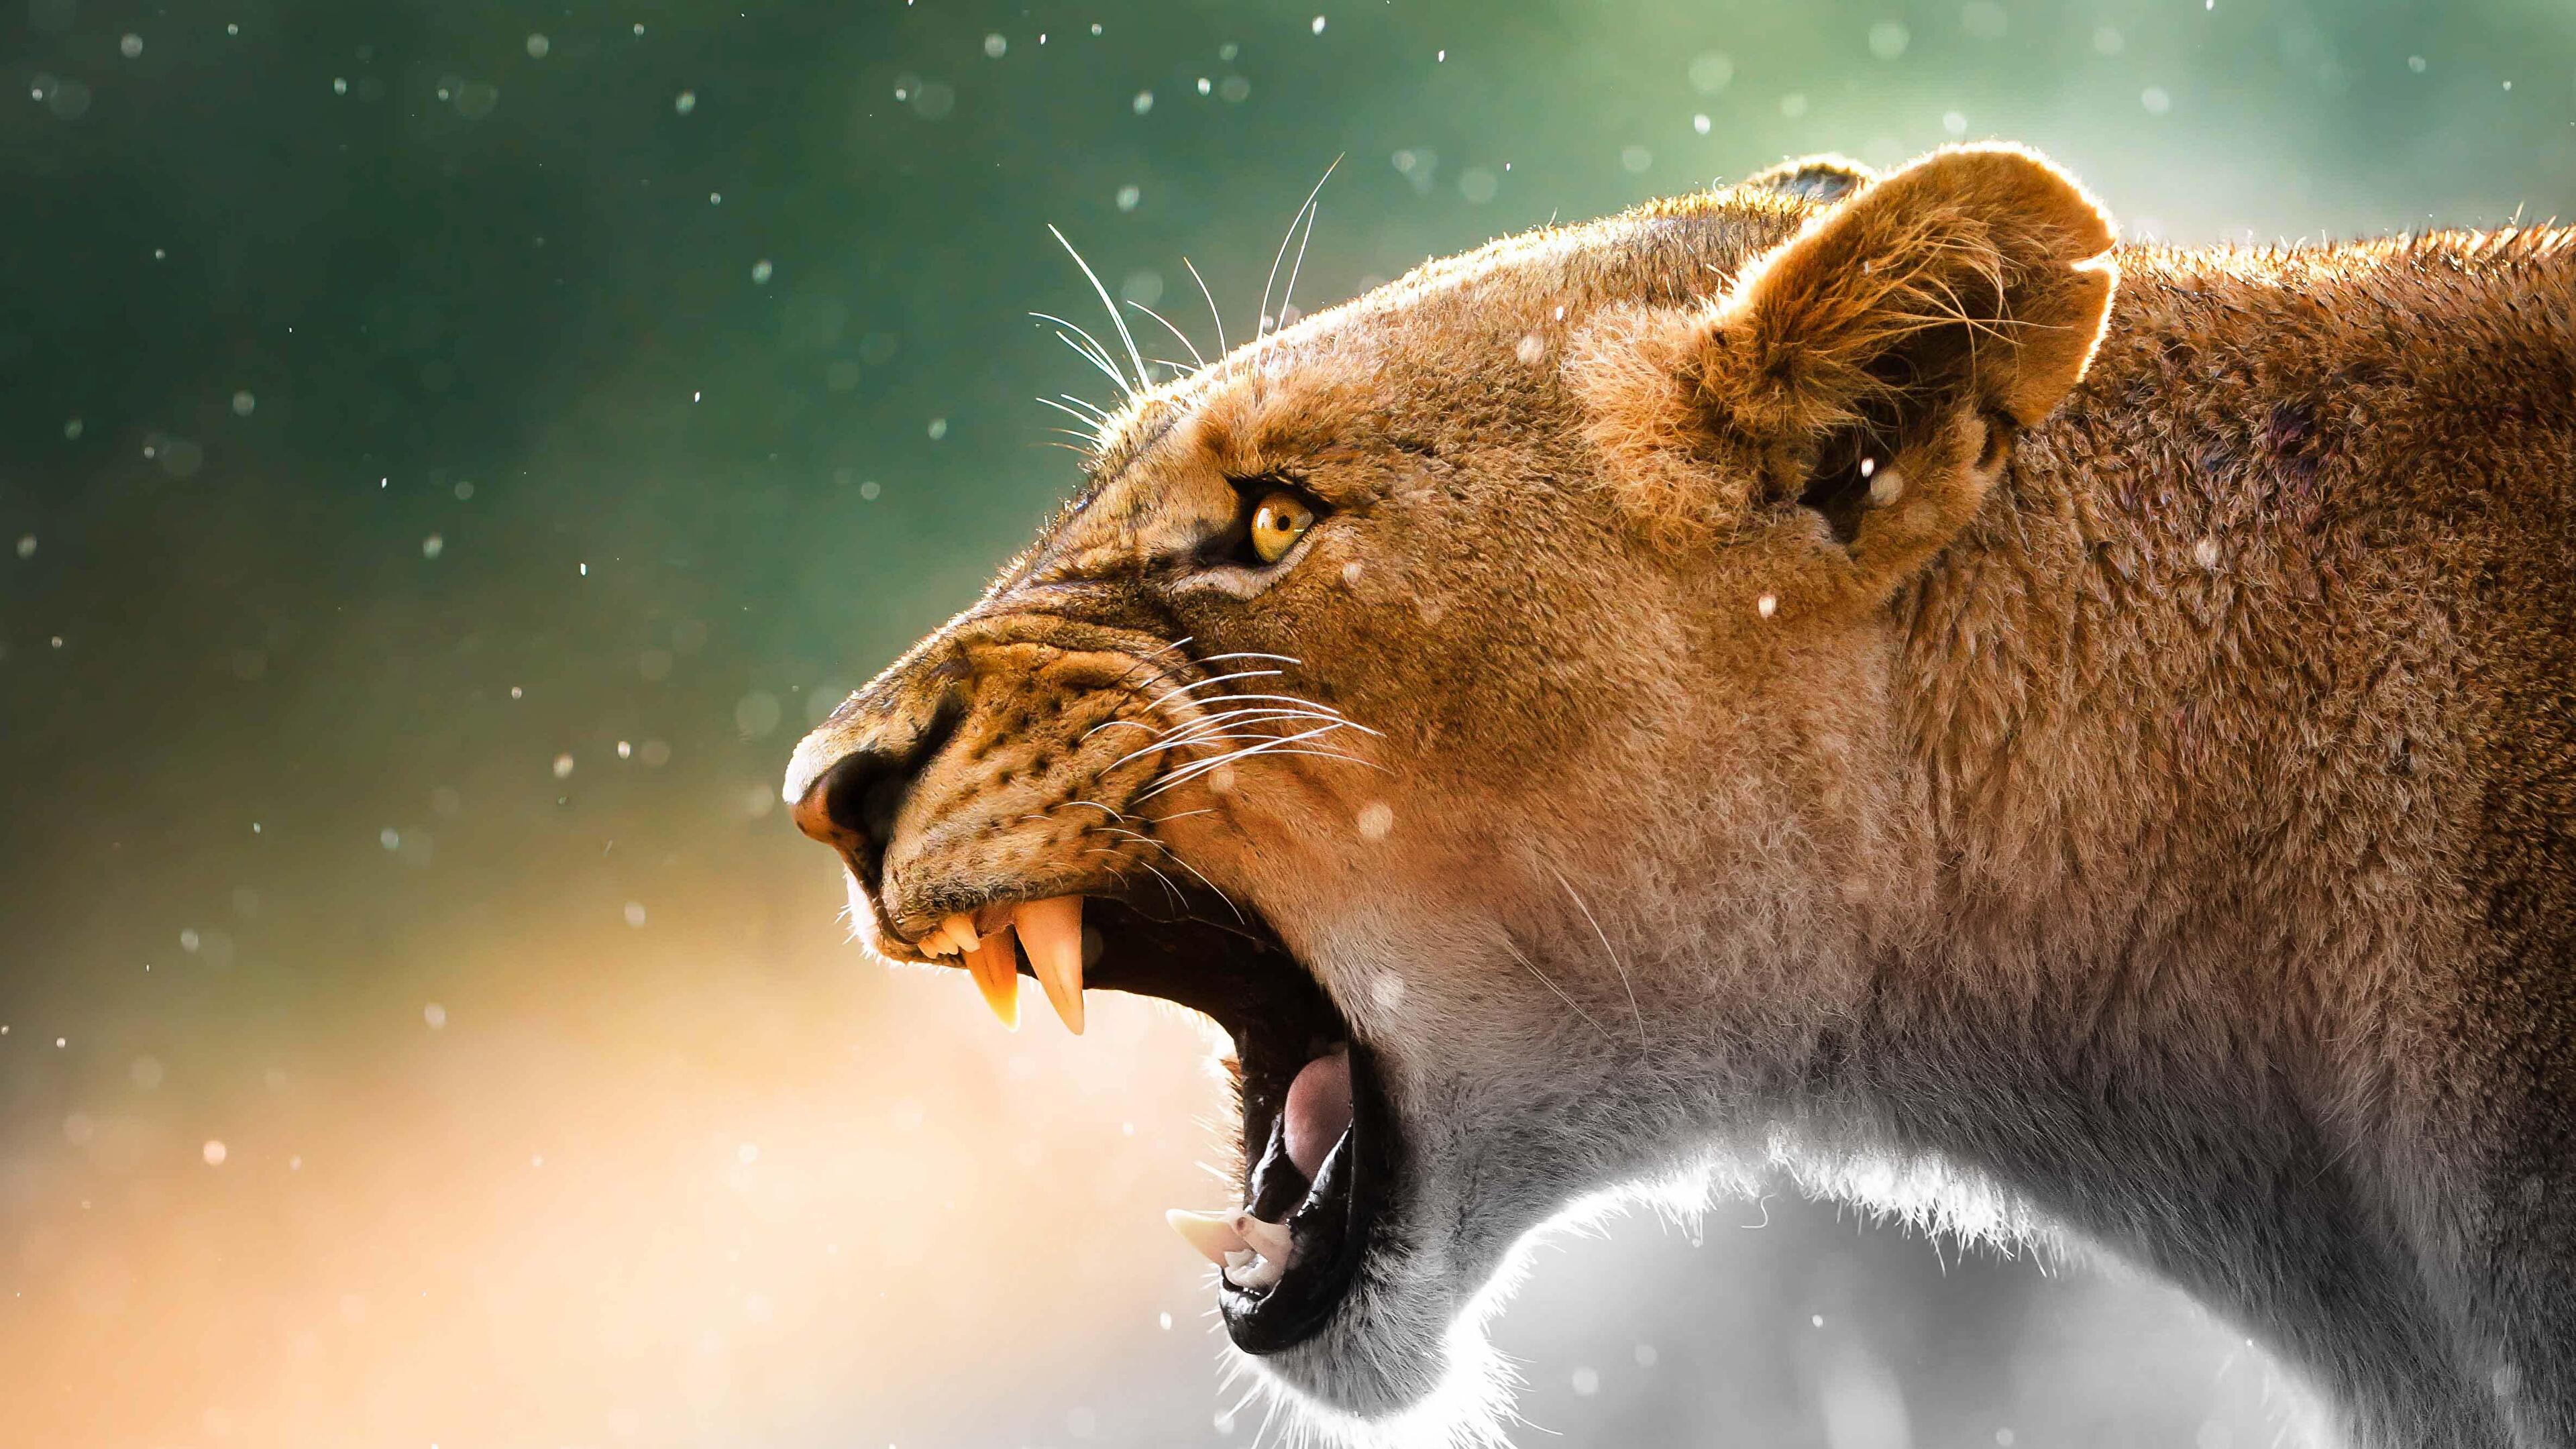 Lion And Lioness Wallpapers - Wallpaper Cave